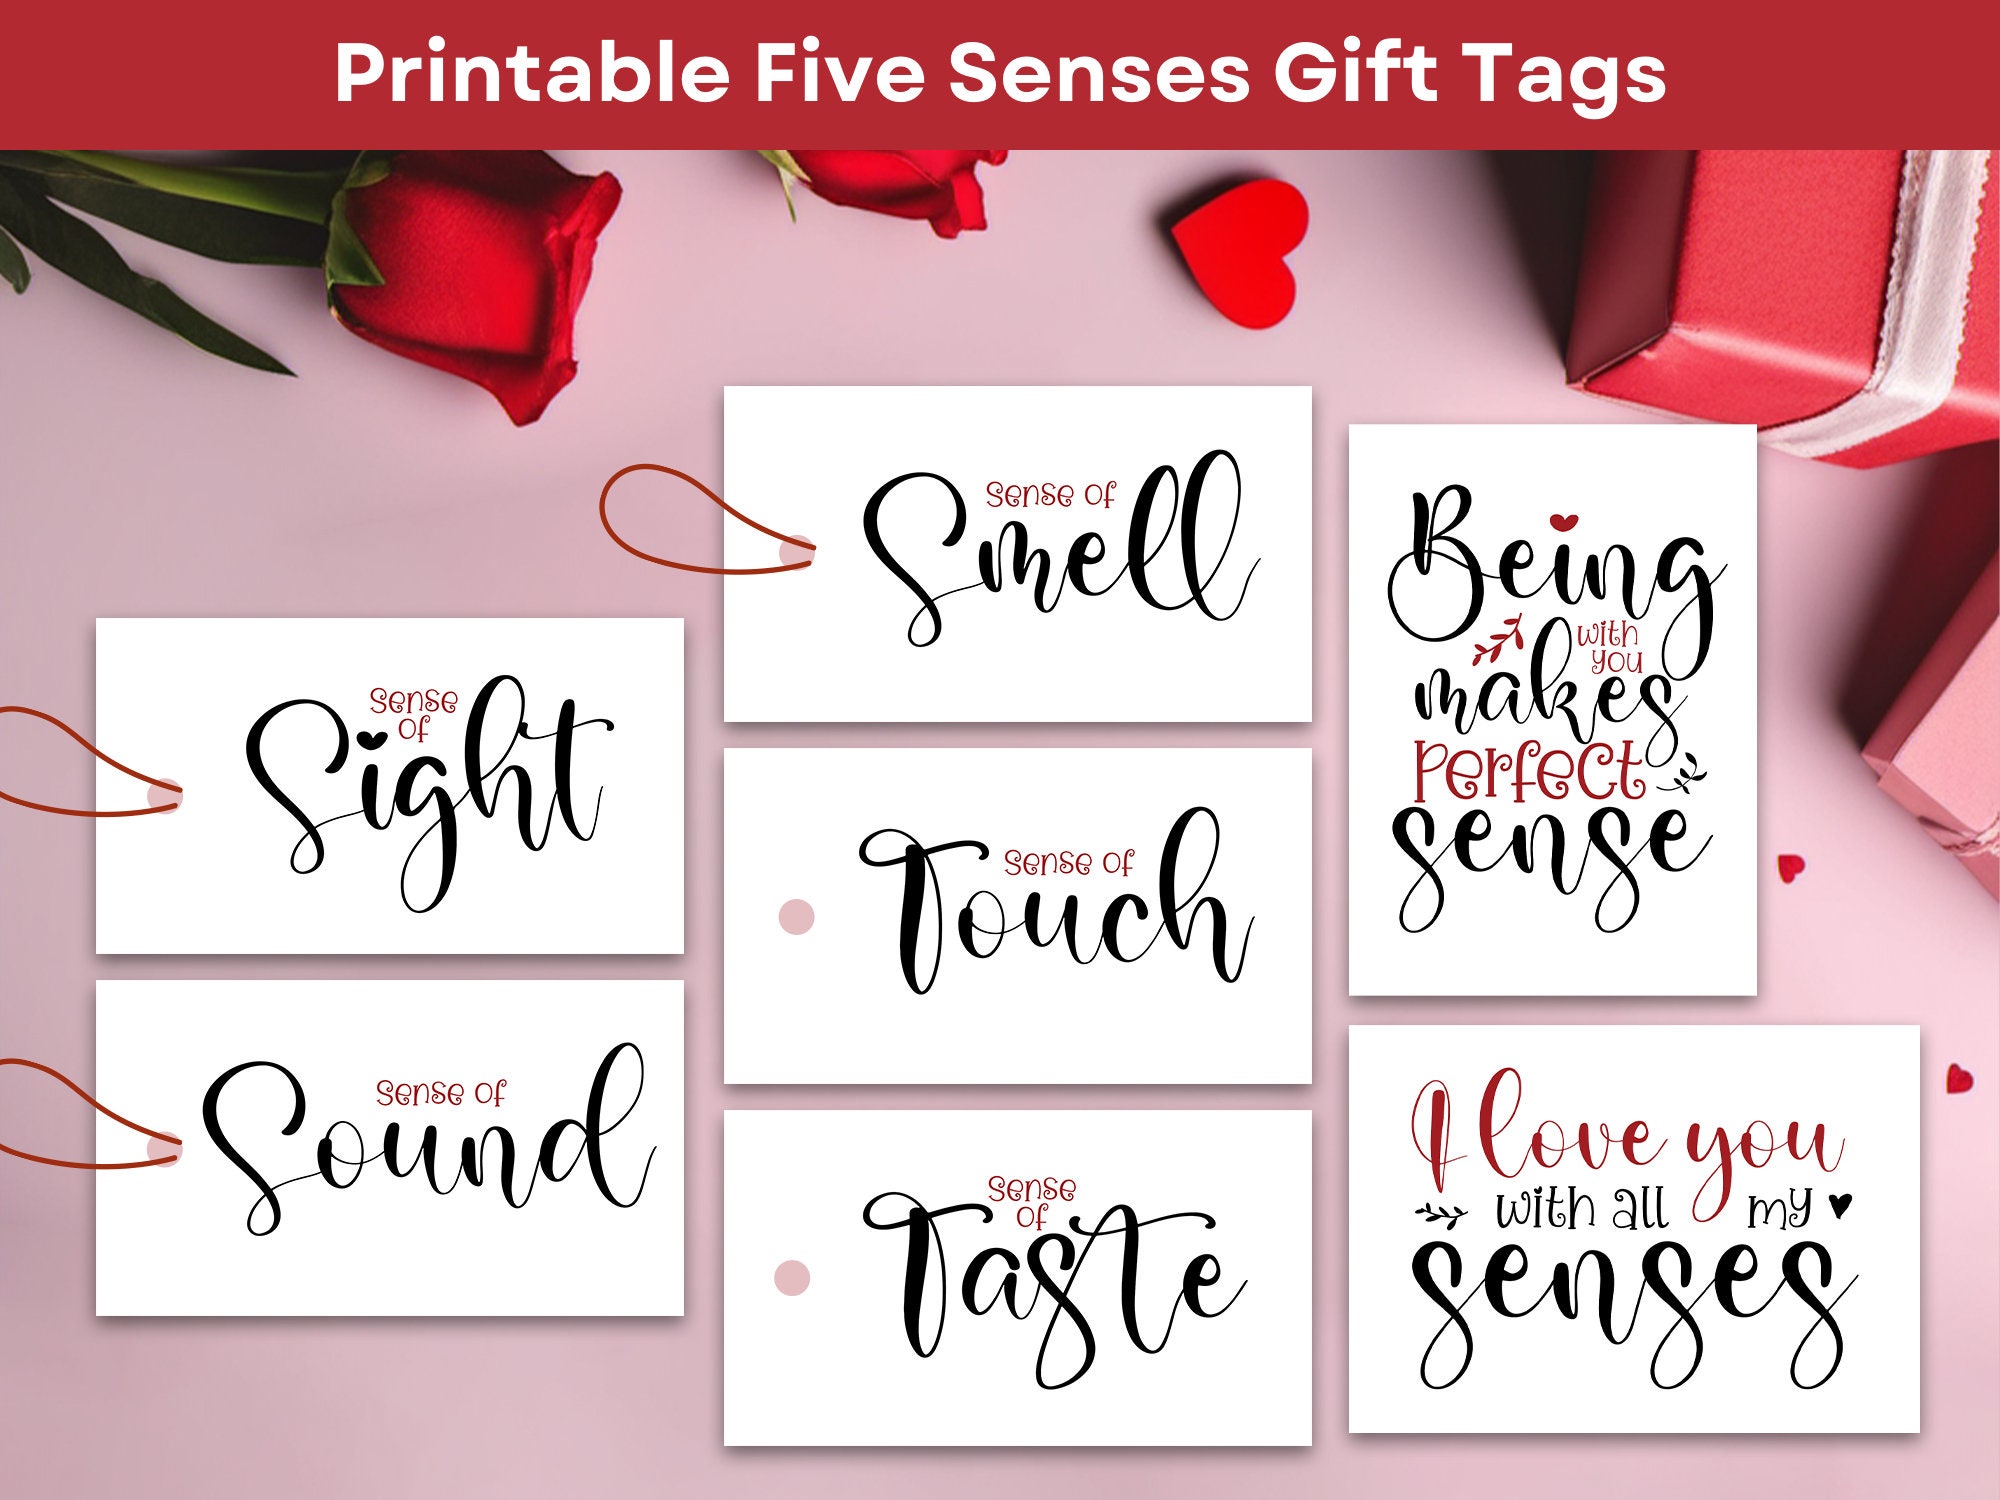 Buy Printable 5 Senses Gift Tags for Him Gifts for Her Gift for